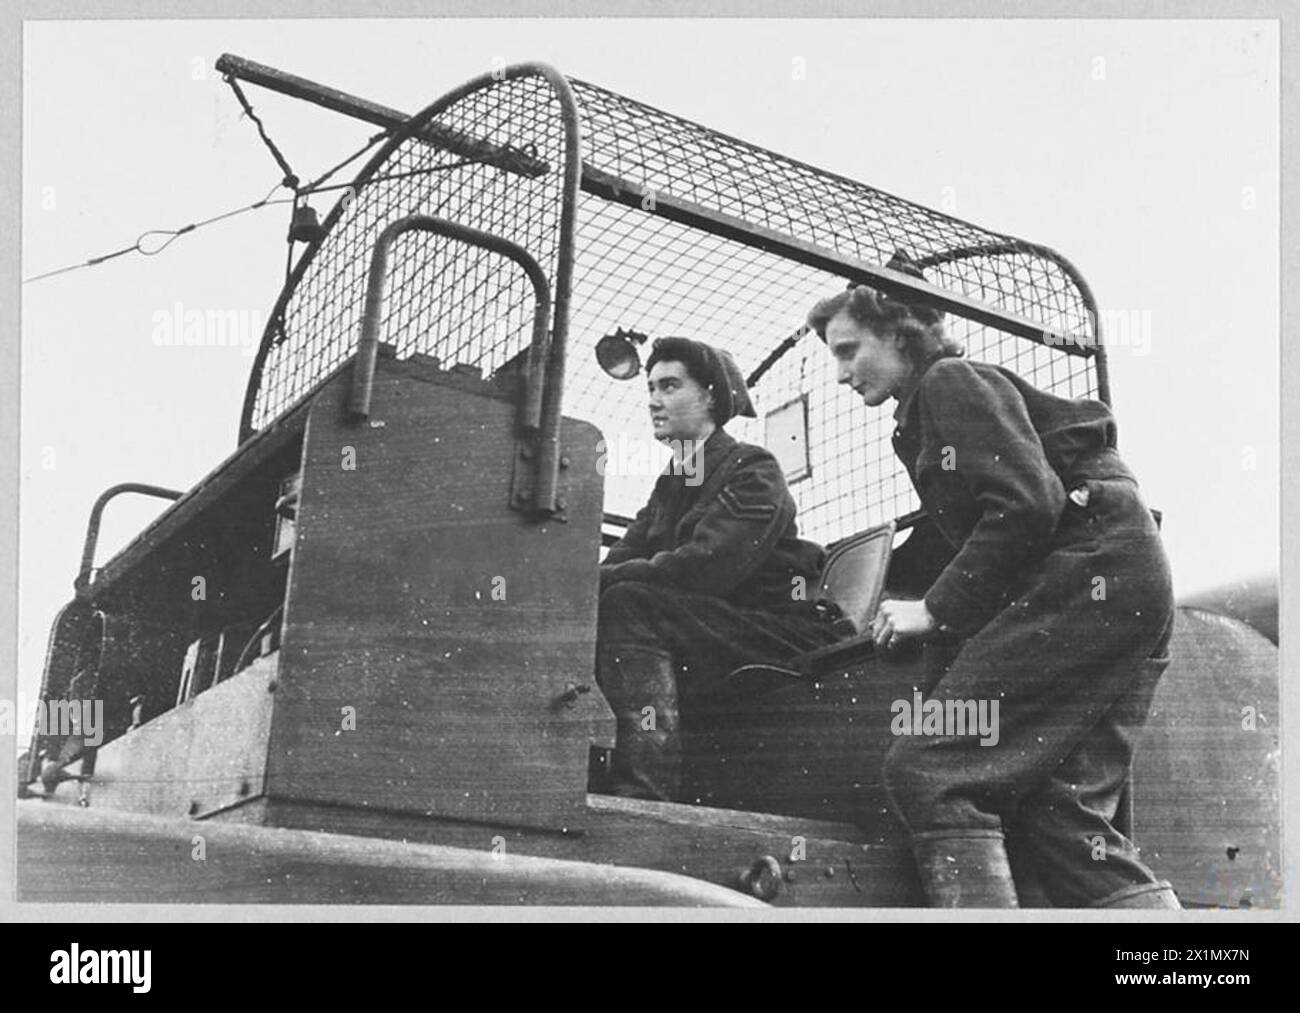 COURAGE OF WAAF BALLOON OPERATORS AT A LONDON BALLOON SITE. - During the raid by the Luftwaffe on London - 17th/18th January 1943 - two W.A.A.F. balloon operators carried on with their job bringing their balloon to required height in spite of the fact that two large high explosives bombs fell practically together. One bomb fell to the right and left of the winch respectively. The two W.A.A.F. balloon operators are 18 und 22 years old. Corporal May Dyson [left] and ACW Peggy Muncy Beeson of Essex (right) at work on their winch the following day. Corporal Dyson is 22 years old and ACW Beeson 18 Stock Photo